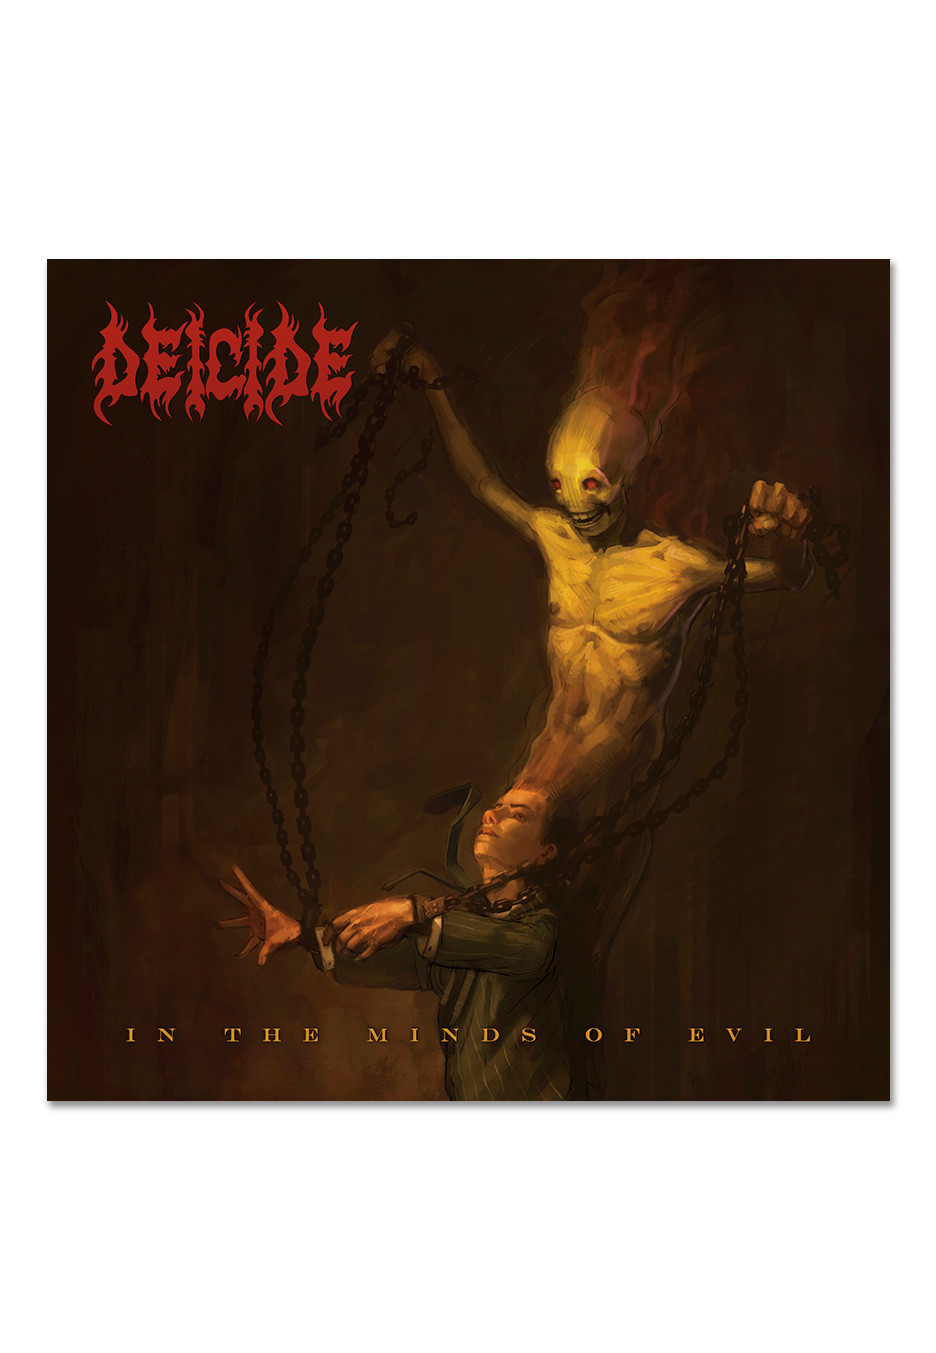 Deicide - In The Minds Of Evil Re-Issue 2023) Ltd. Transparent Sun Yellow - Vinyl